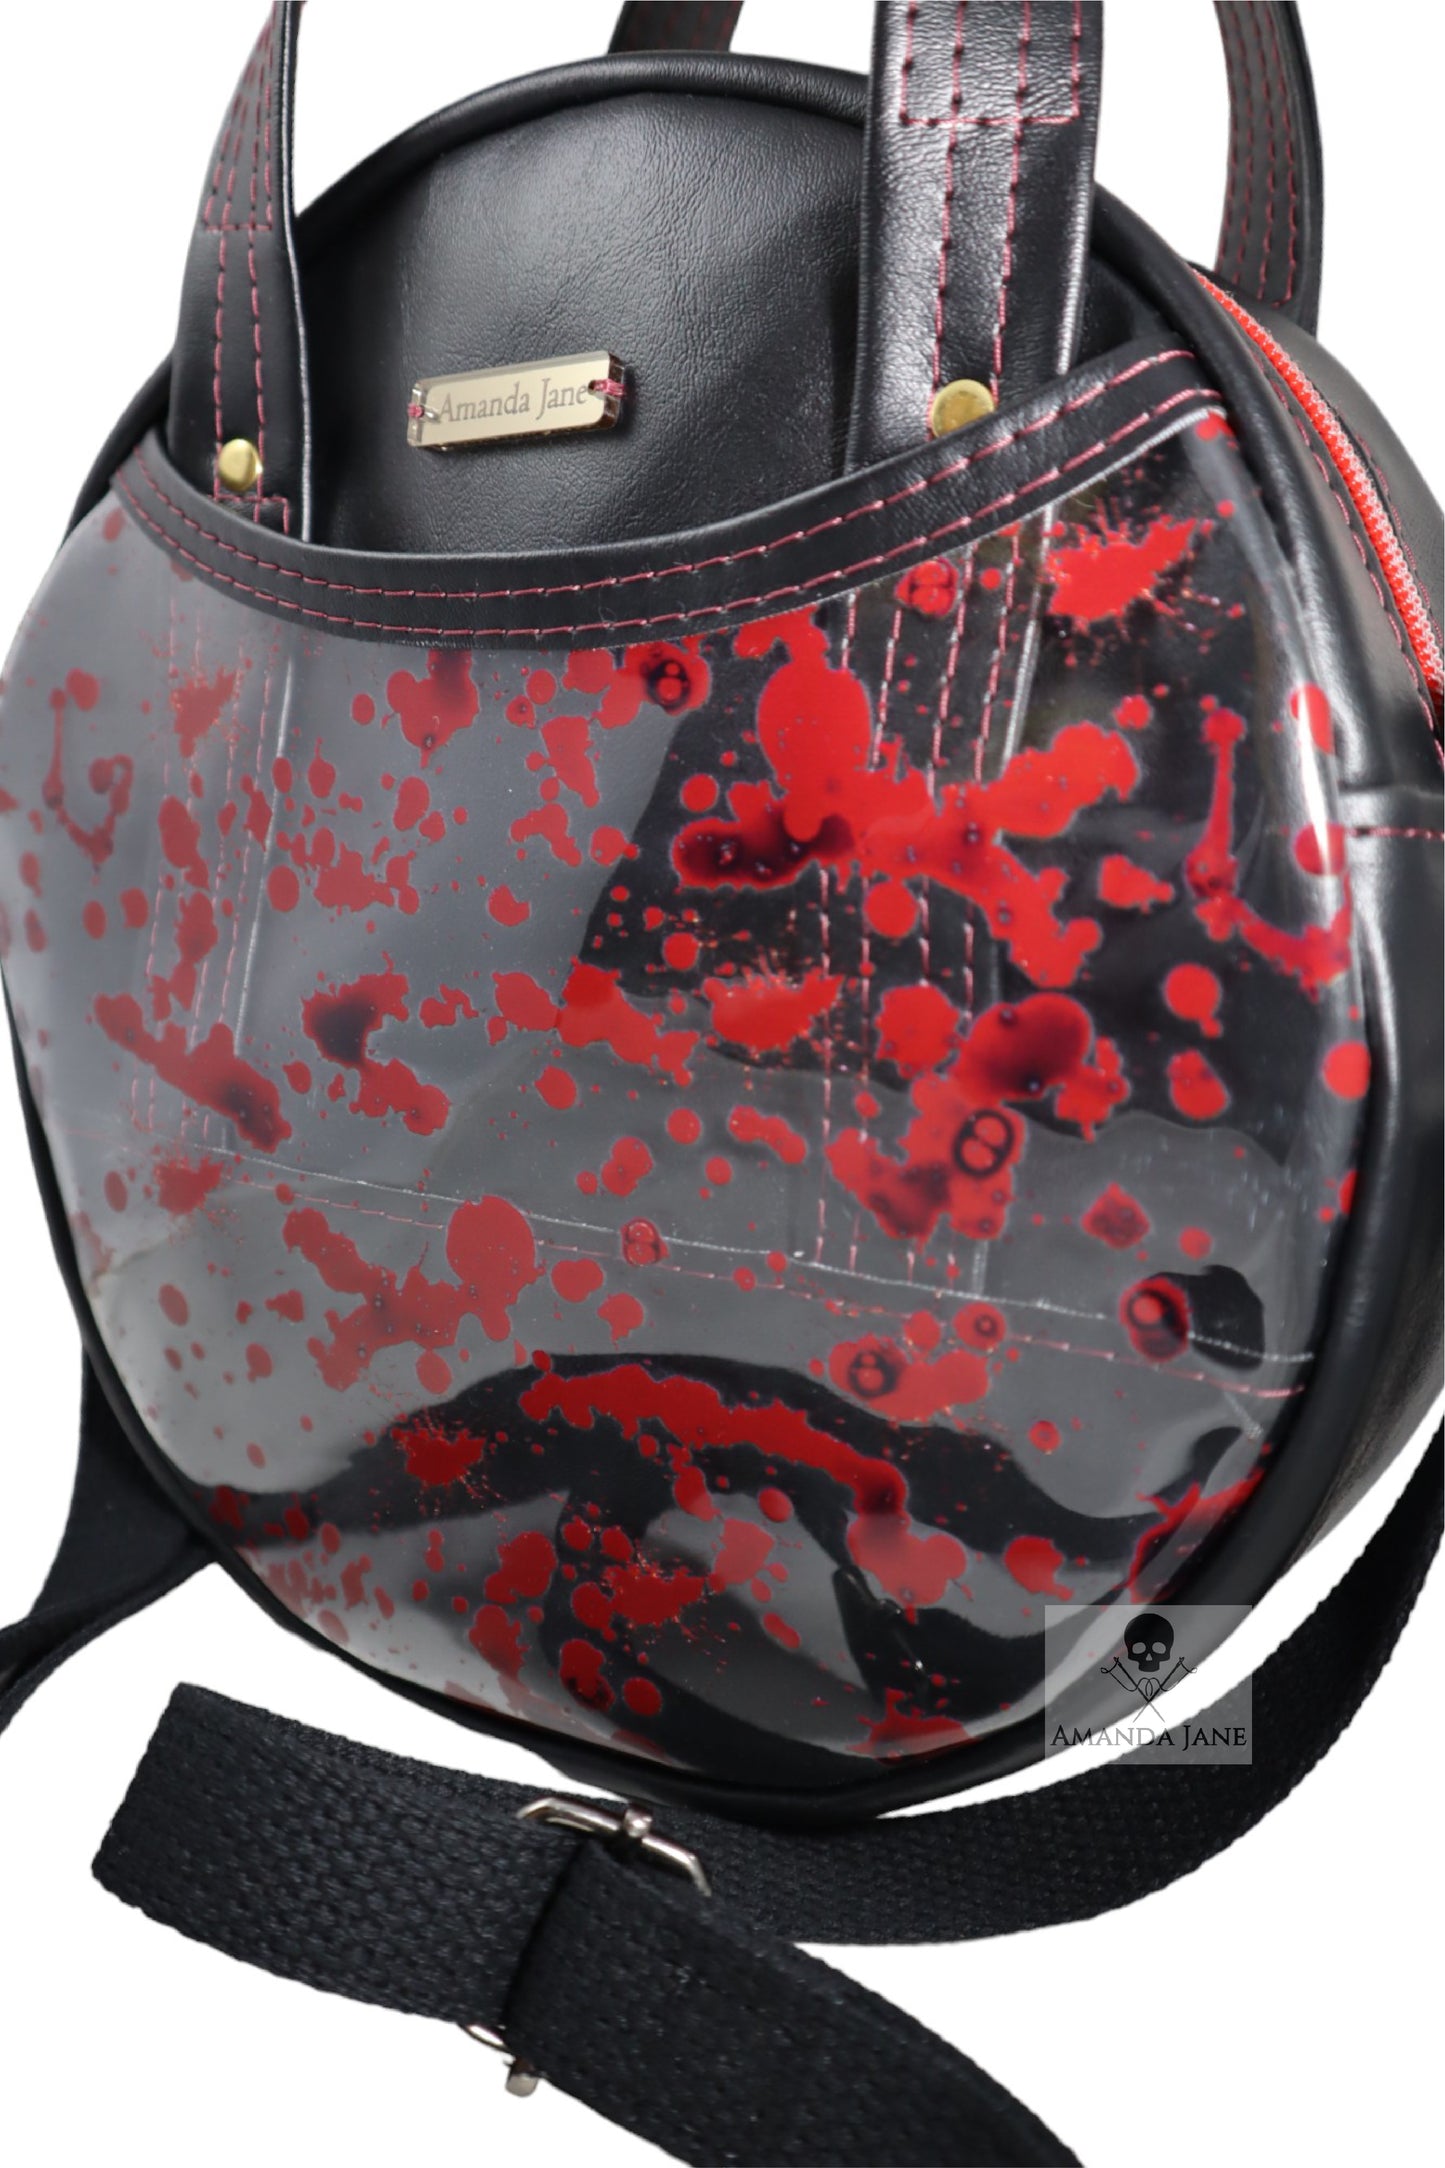 Handcrafted circle purse bag black and red fake blood splatter